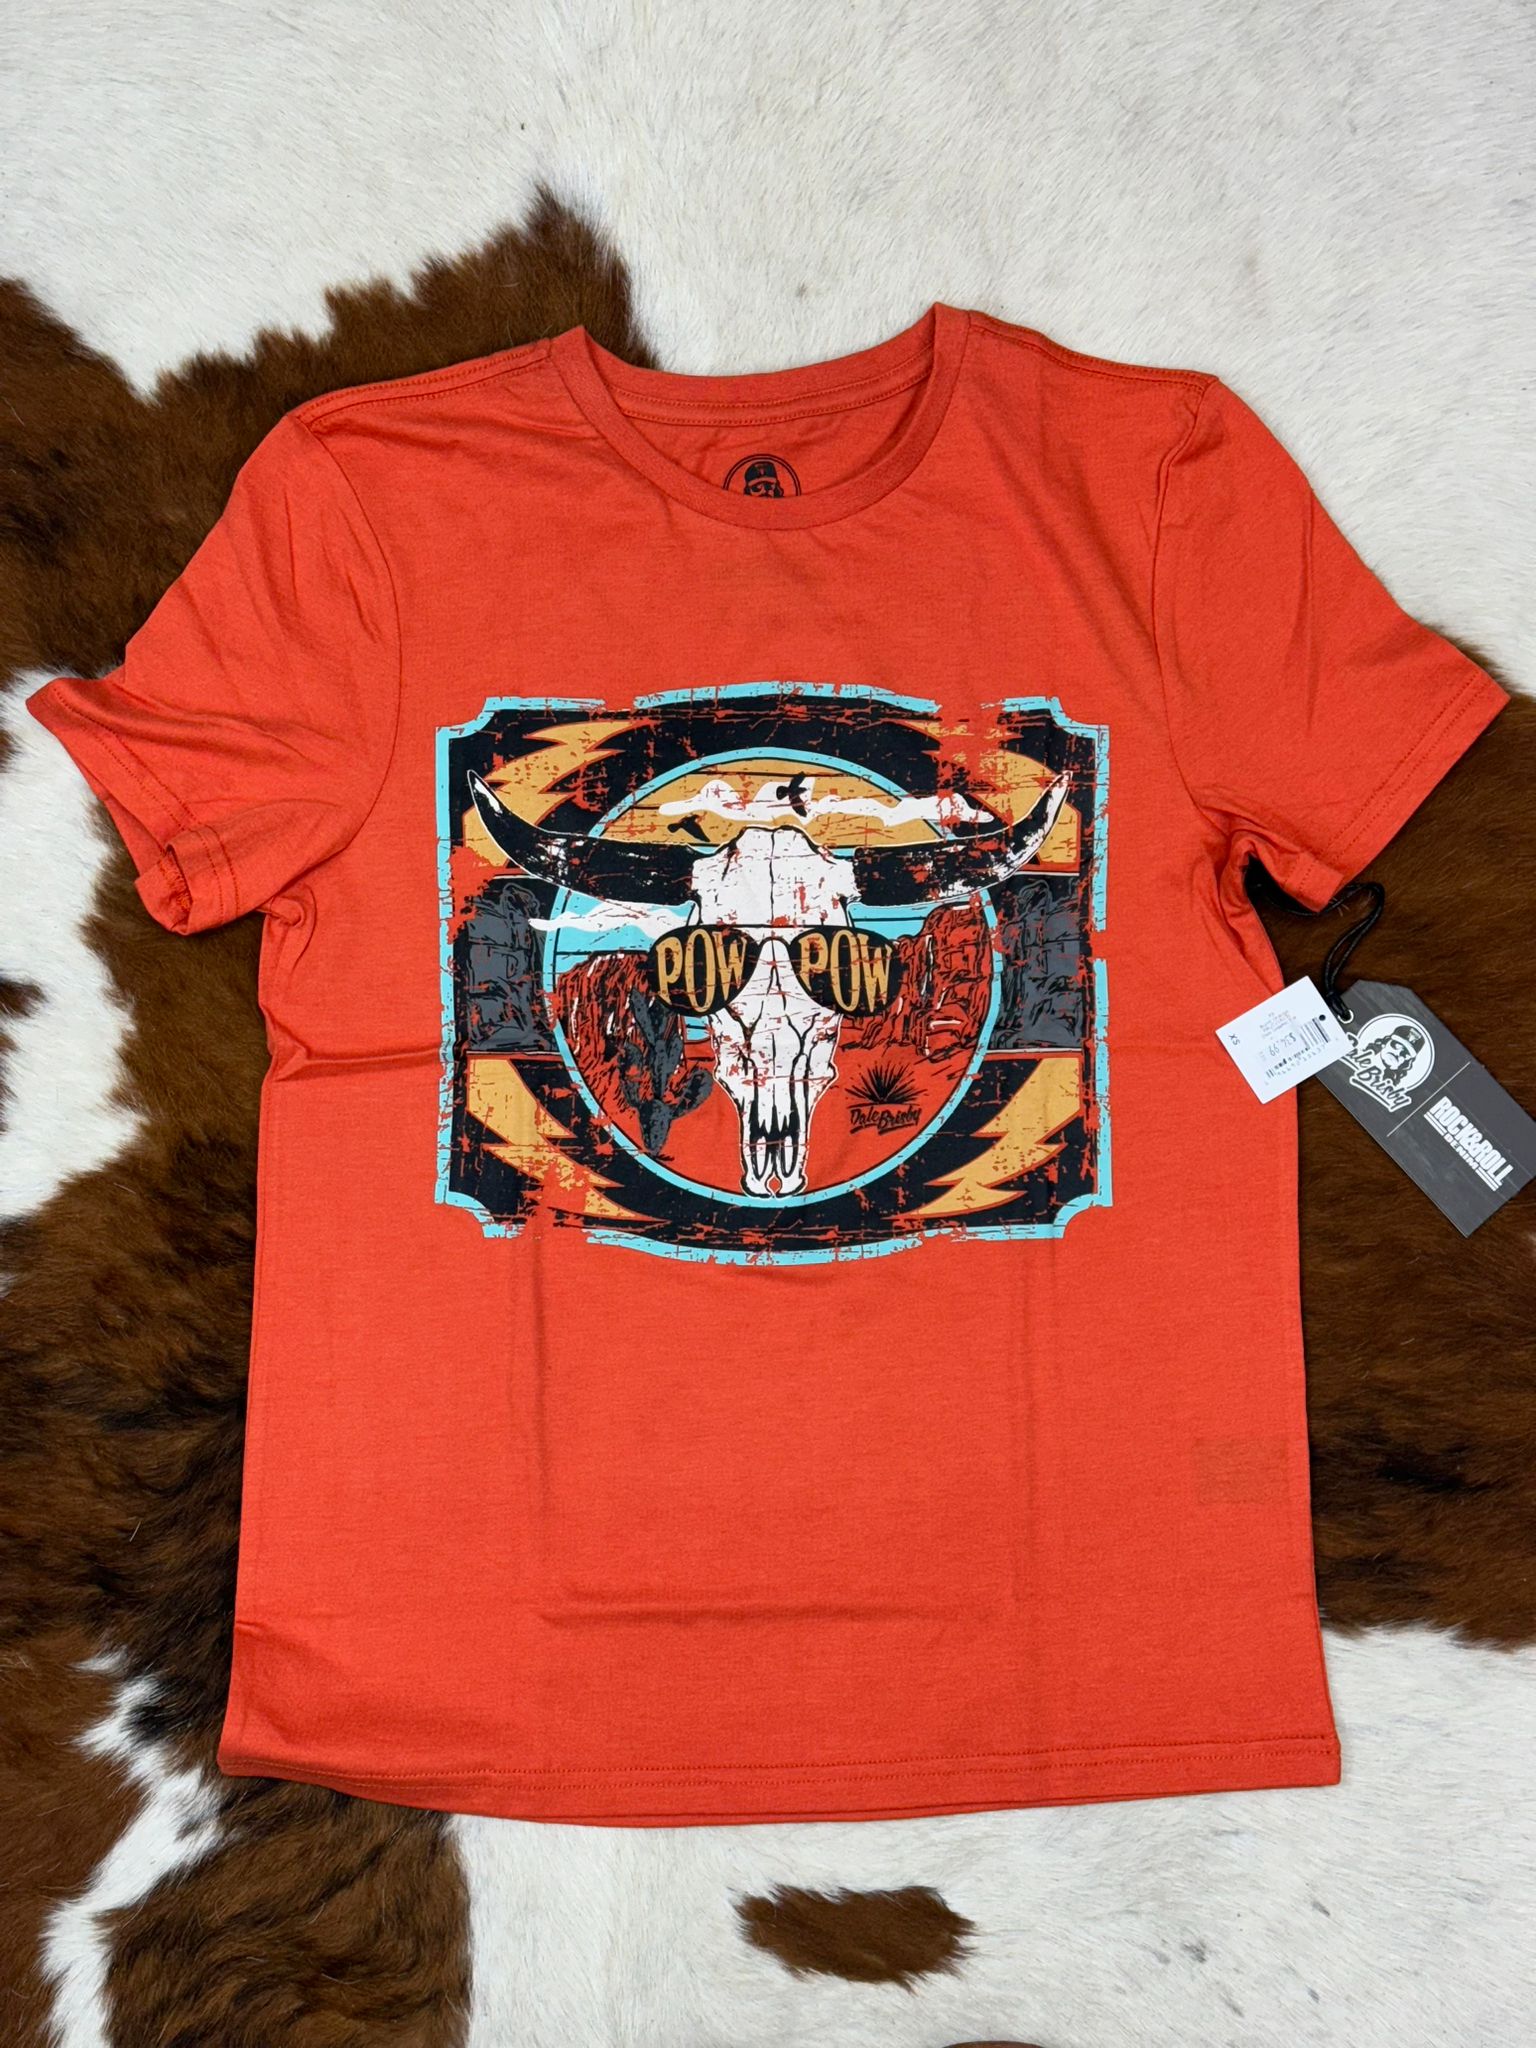 DALE BRISBY X ROCK&ROLL GRAPHIC TEE BURNT ORANGE SHORT SLEEVE T-SHIRT